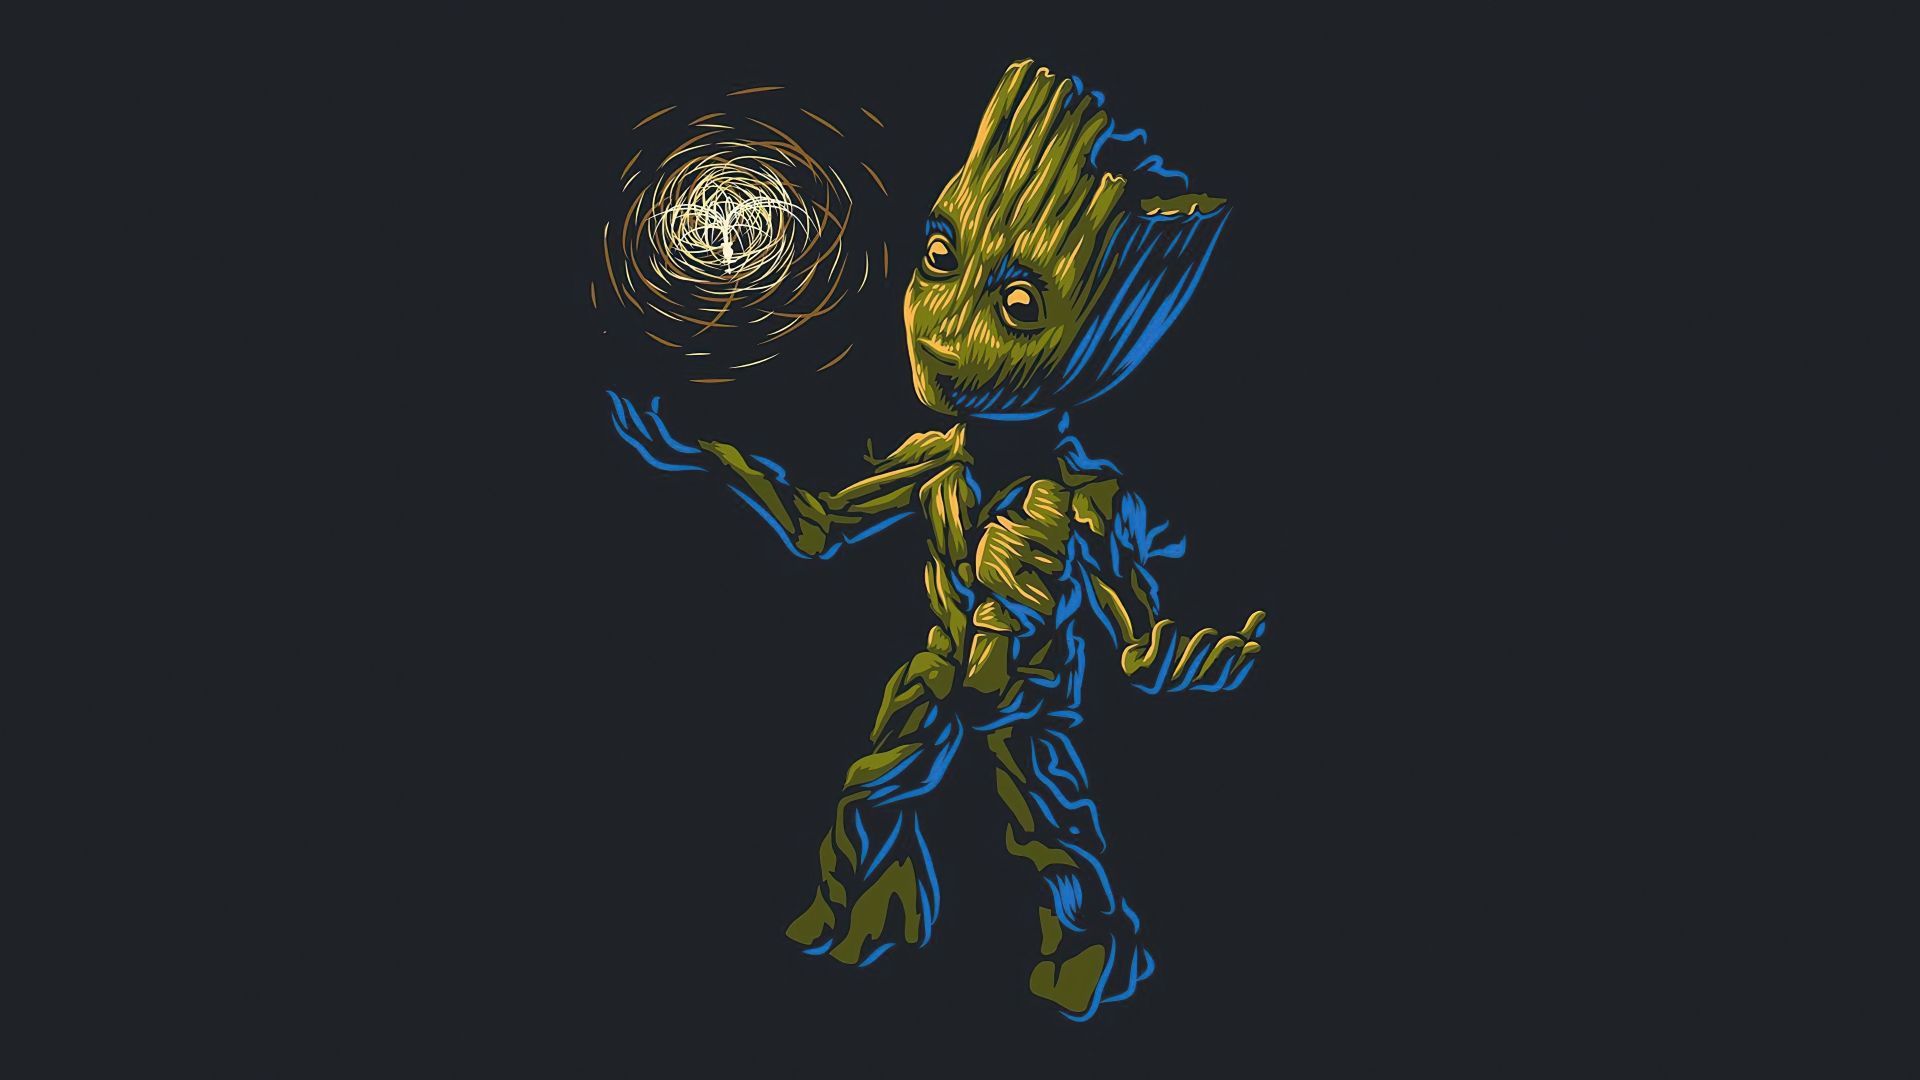 Baby groot, play, art wallpaper, HD image, picture, background, 3Df53e